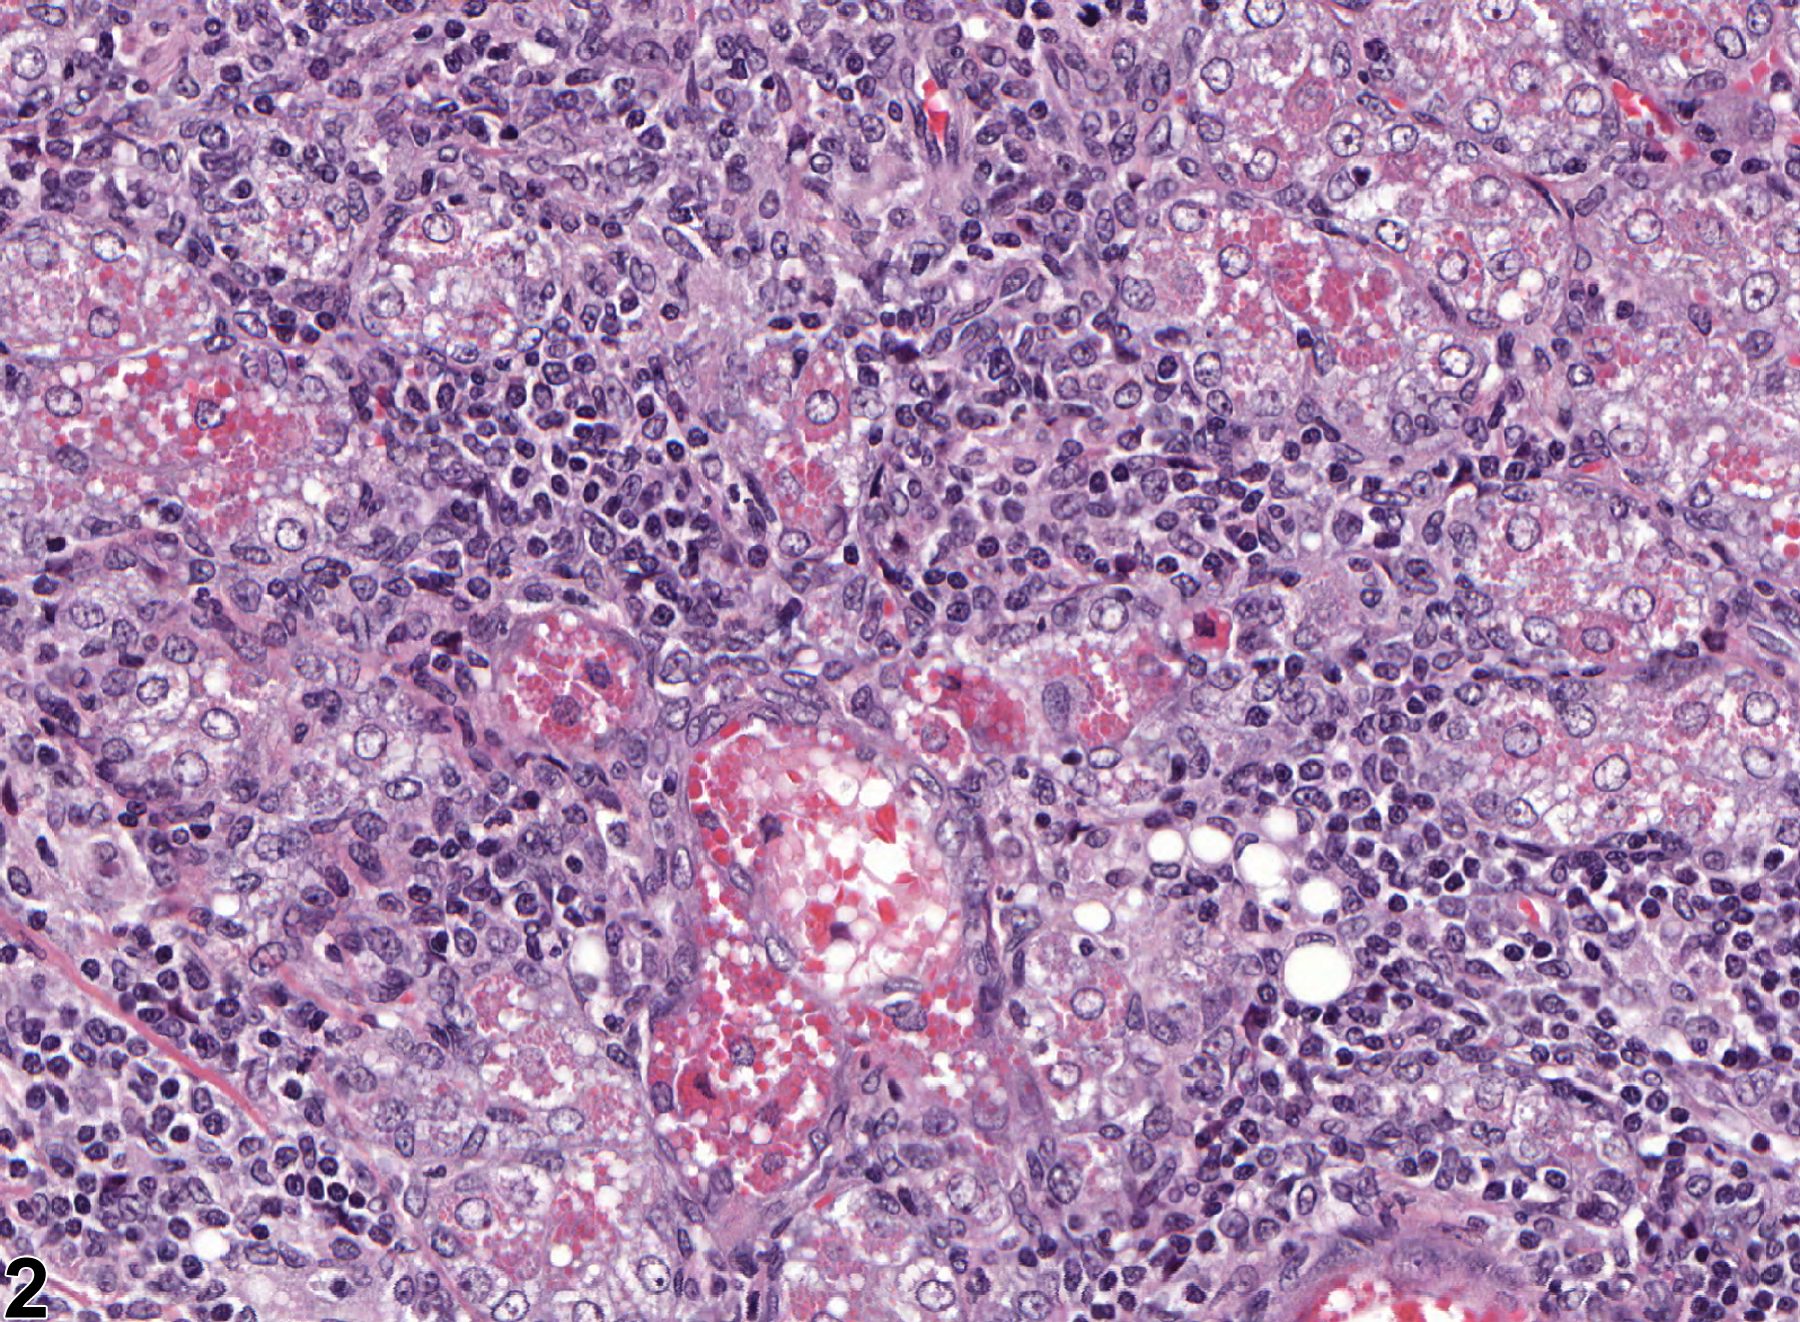 Image of infiltration cellular in the clitoral gland from a female F344/N rat in a chronic study